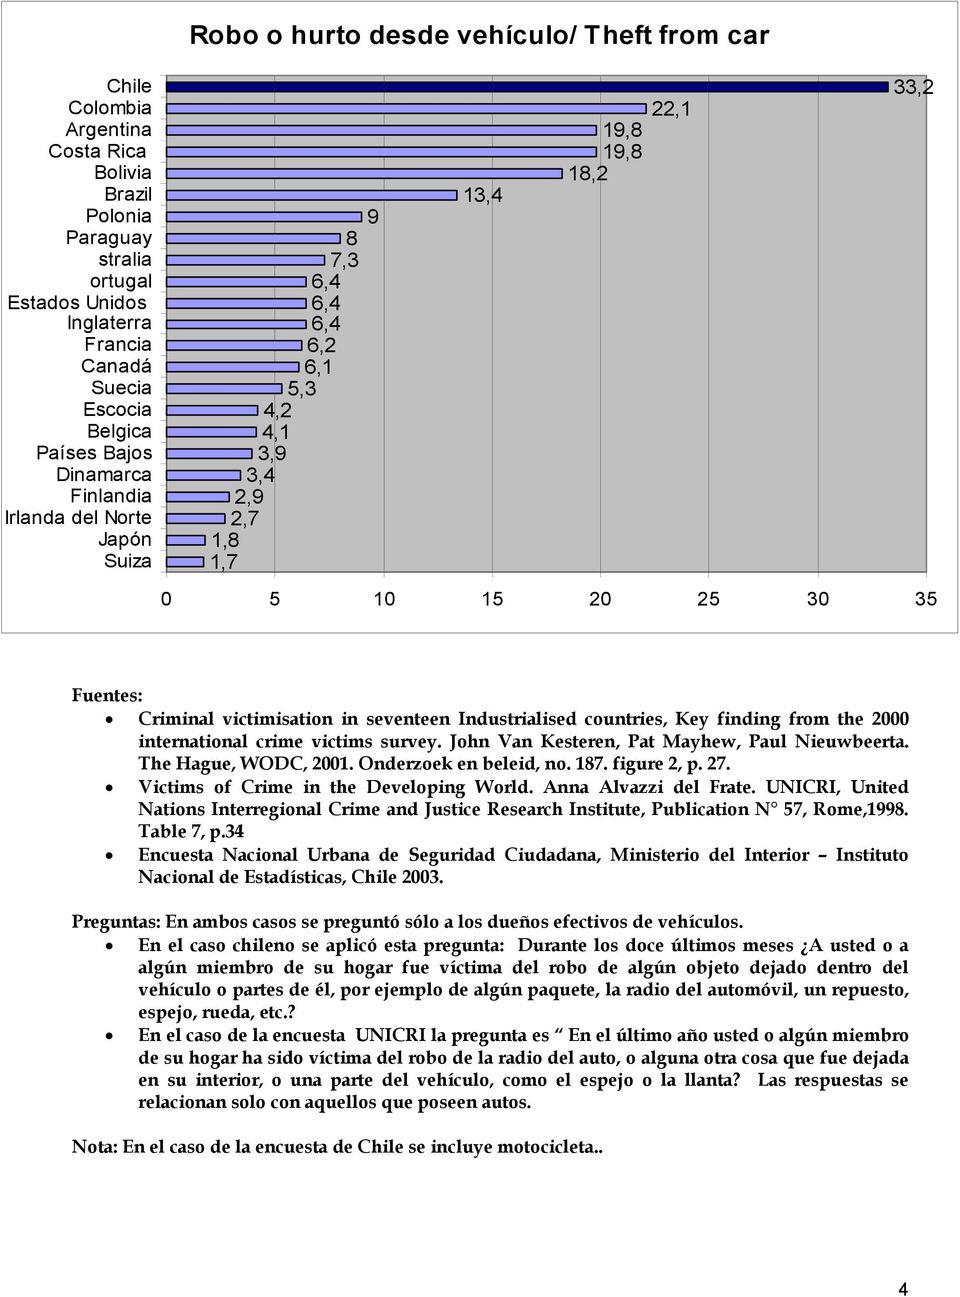 figure, p. 7. Nations Interregional Crime and Justice Research Institute, Publication N 57, Rome,1998. Table 7, p.